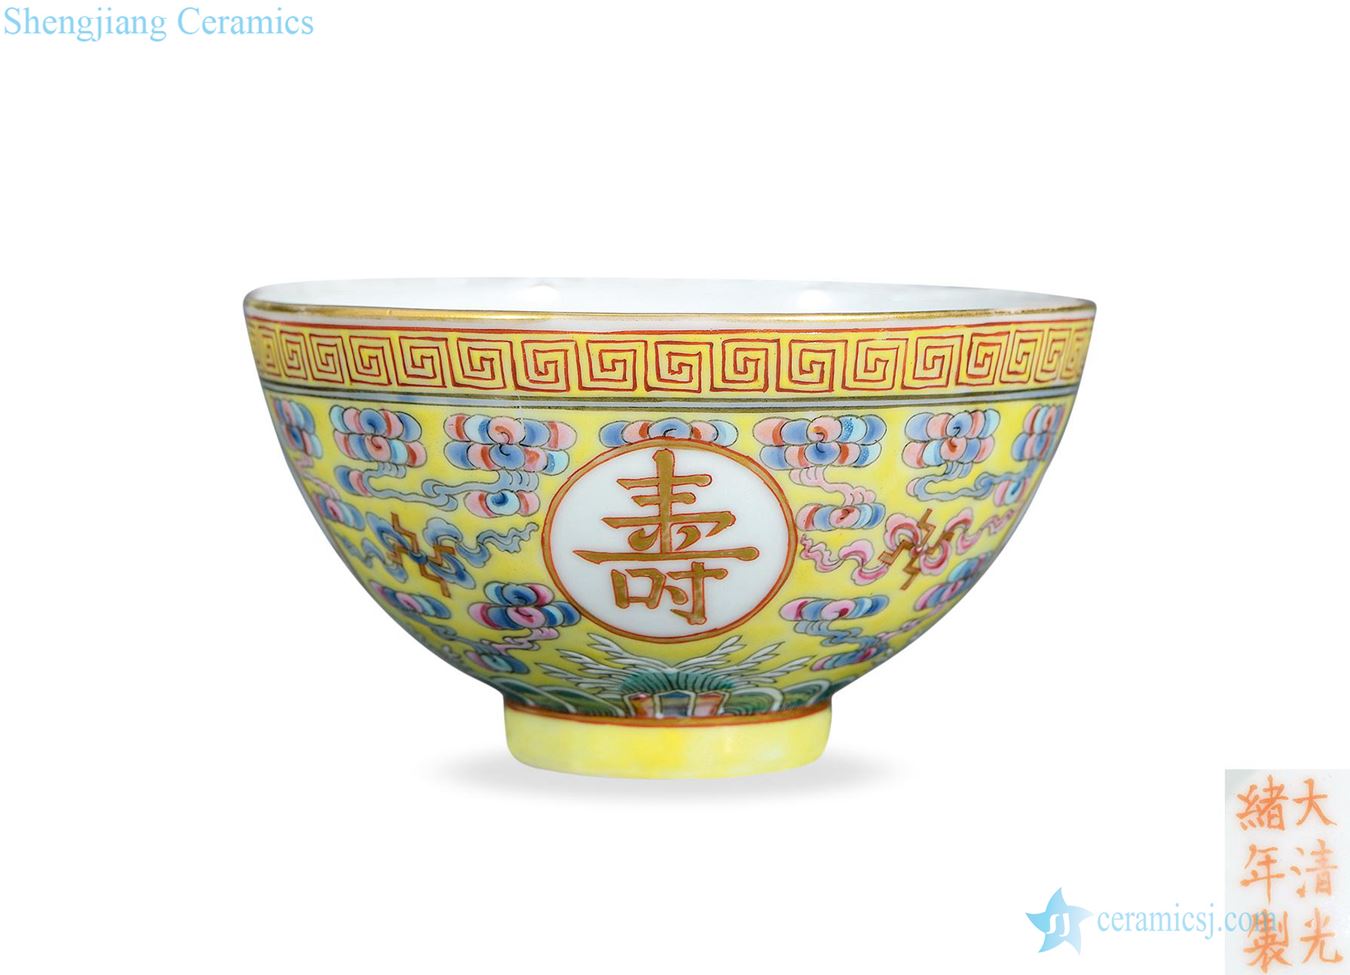 Pastel reign of qing emperor guangxu stays in a bowl